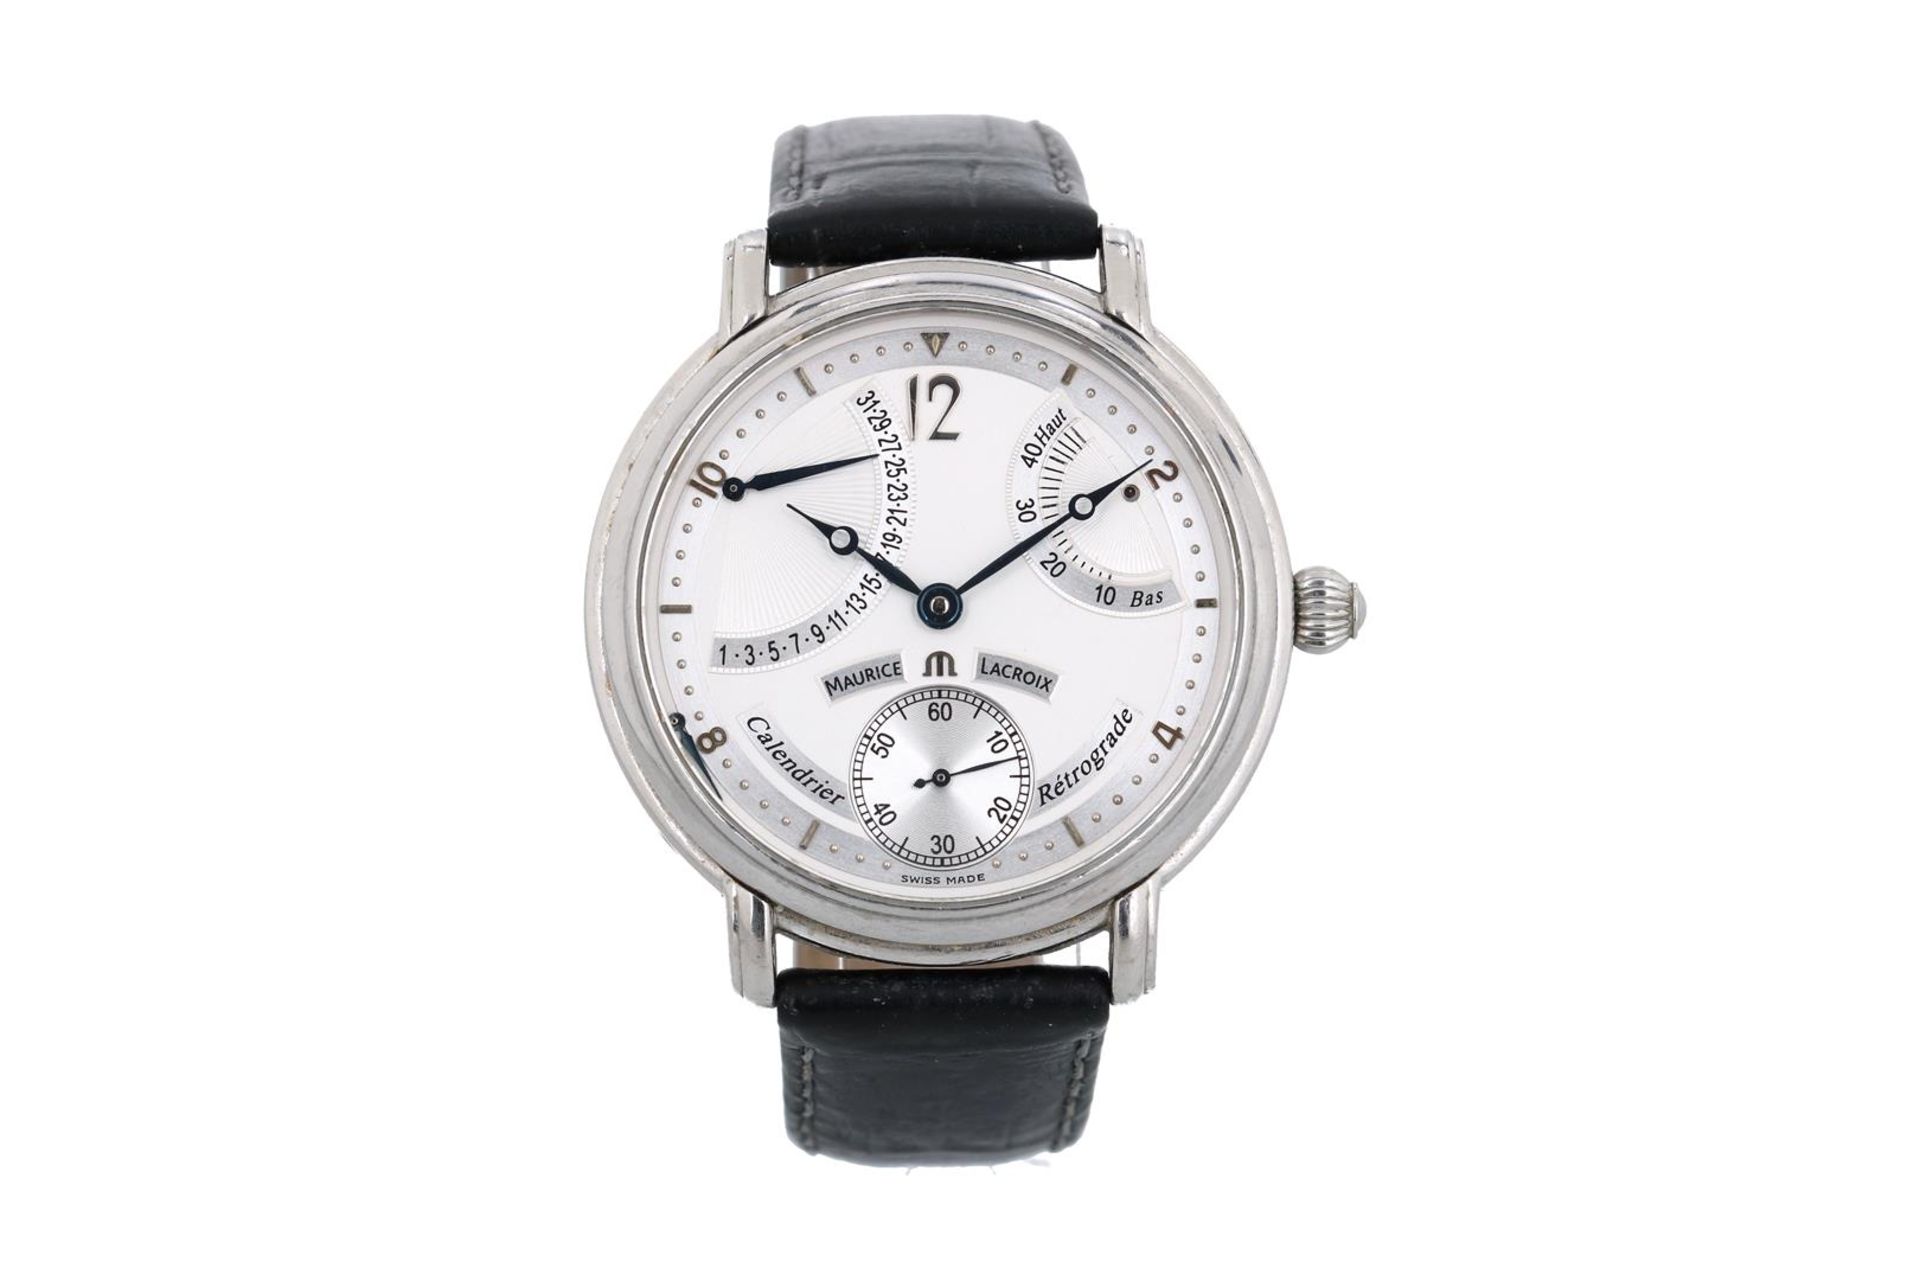 Maurice Lacroix, steel gentlemans watch, 'Calendrier Rétrograde', masterpeice, the manual movement w